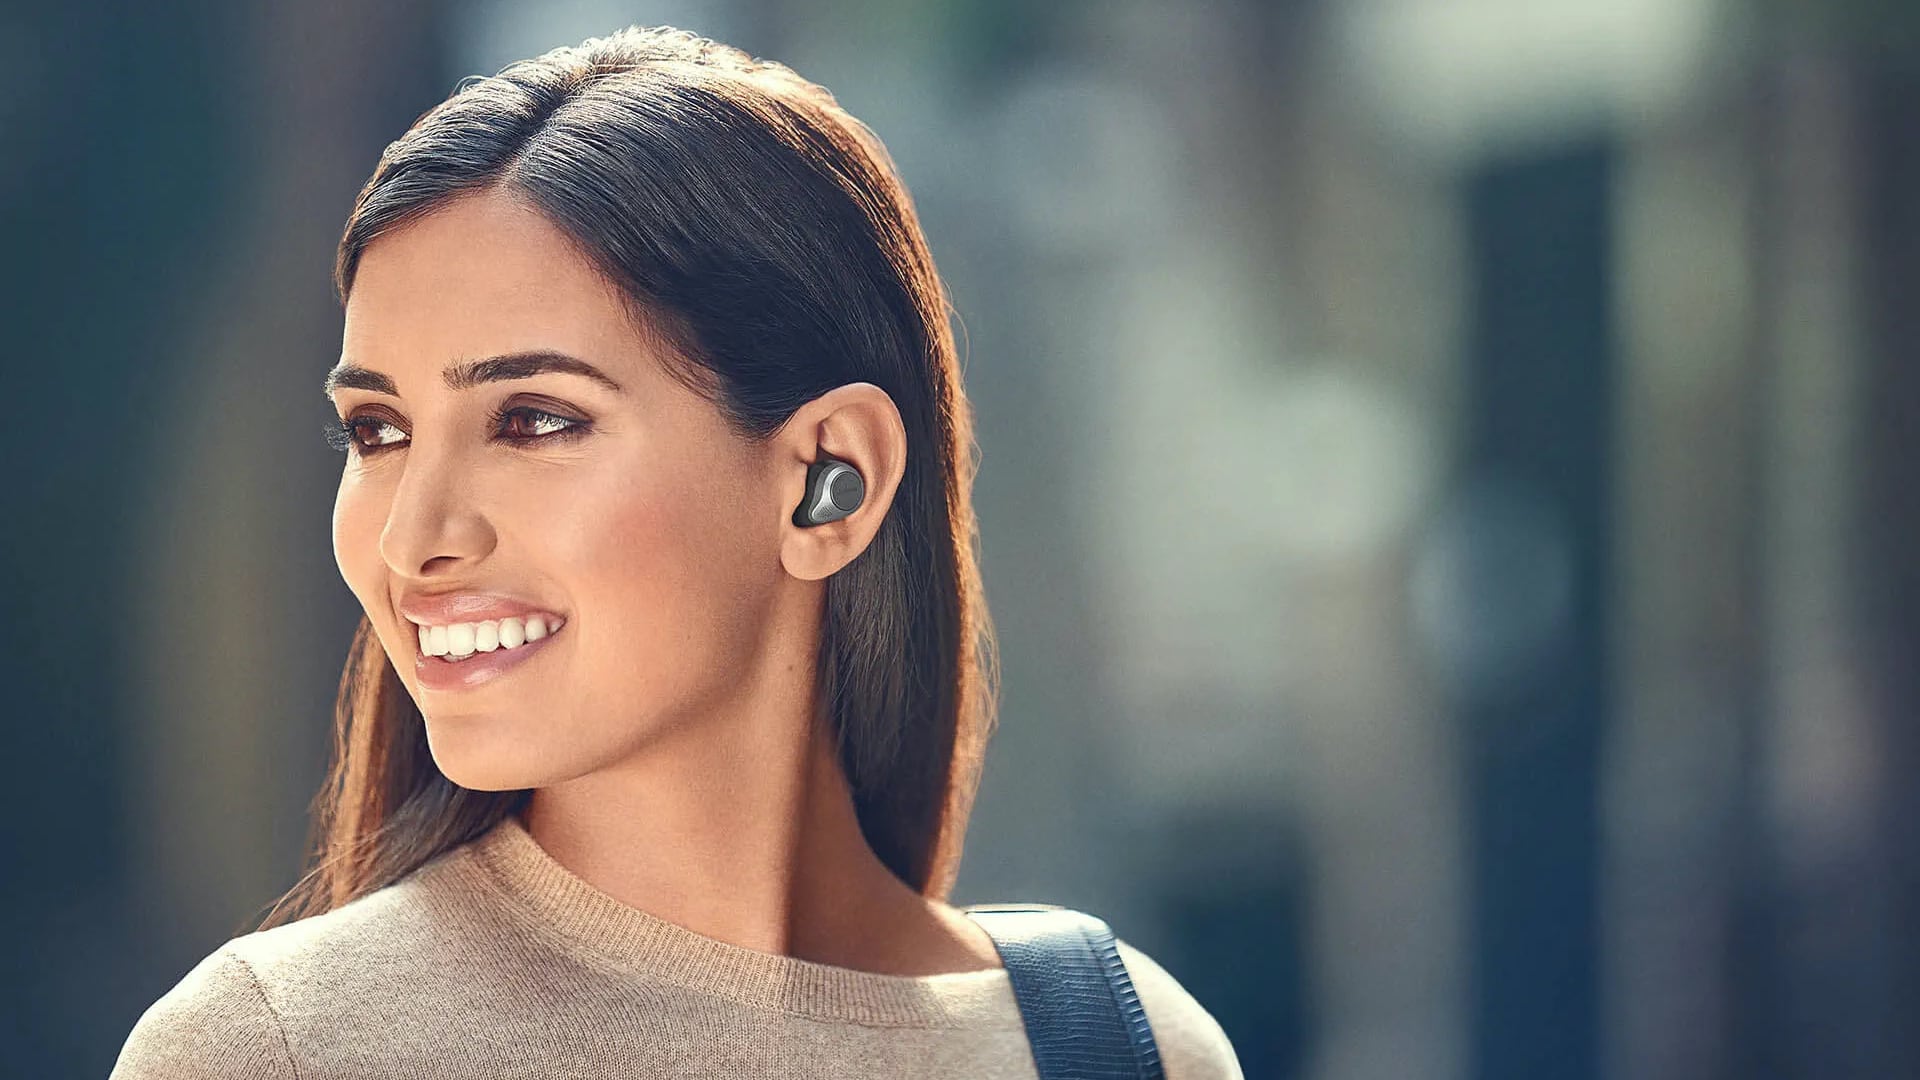 Jabra Elite 85t true wireless earbuds offer HearThrough mode for only  sounds you want » Gadget Flow